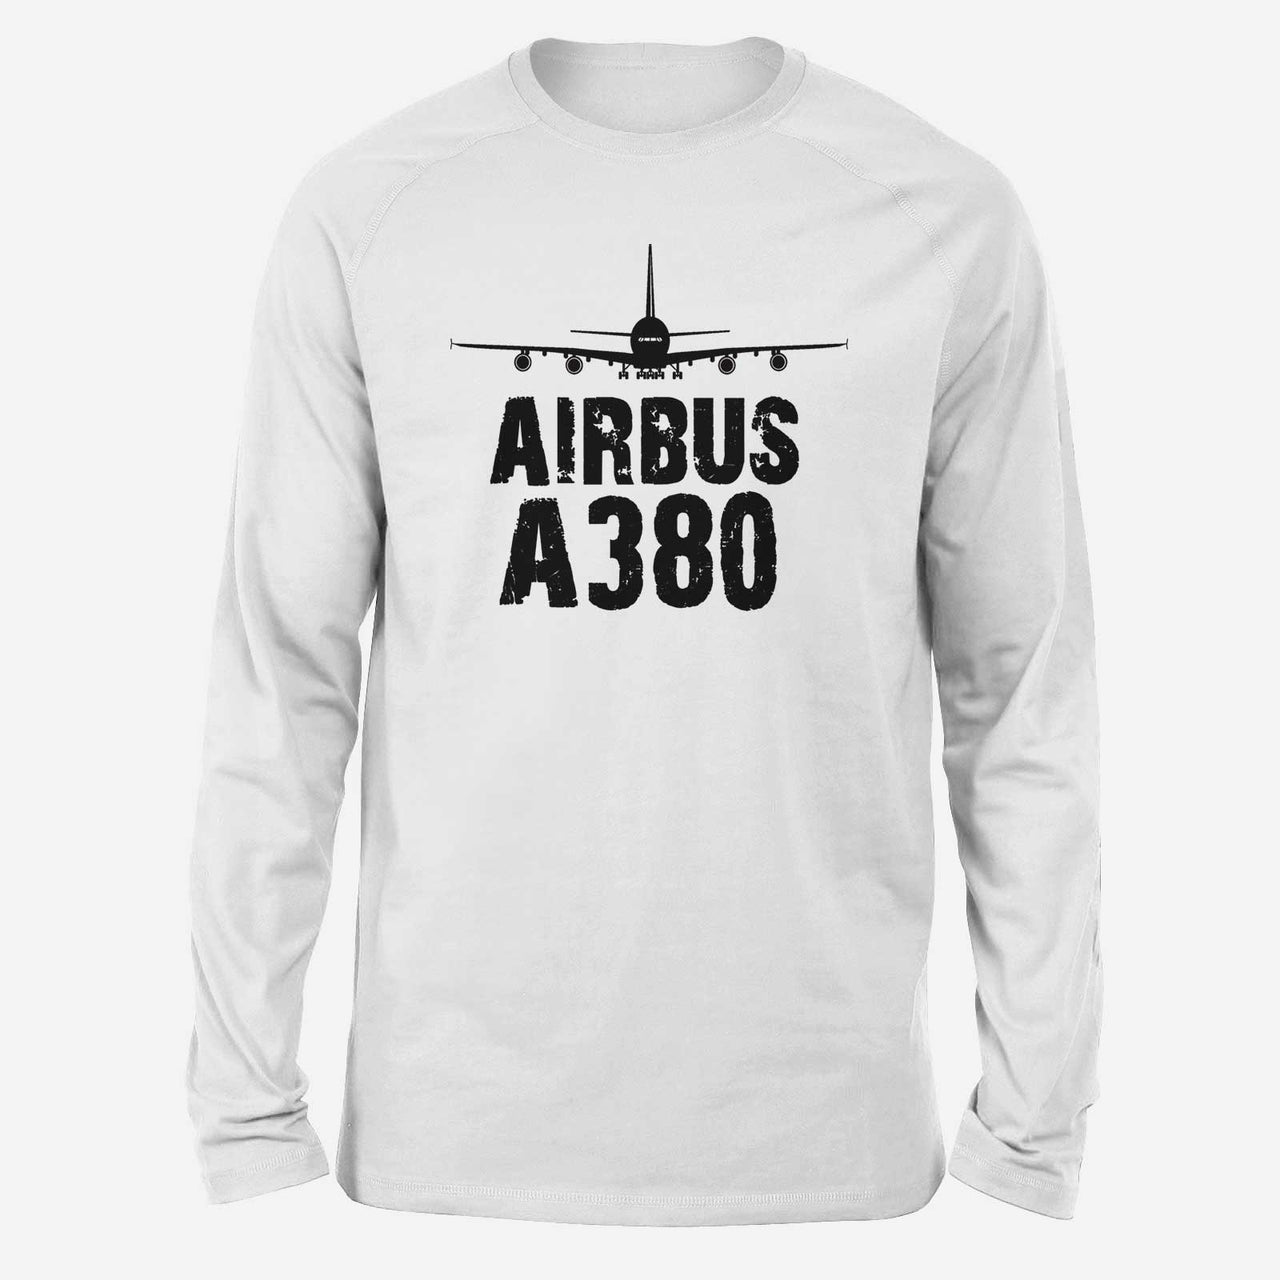 Airbus A380 & Plane Designed Long-Sleeve T-Shirts